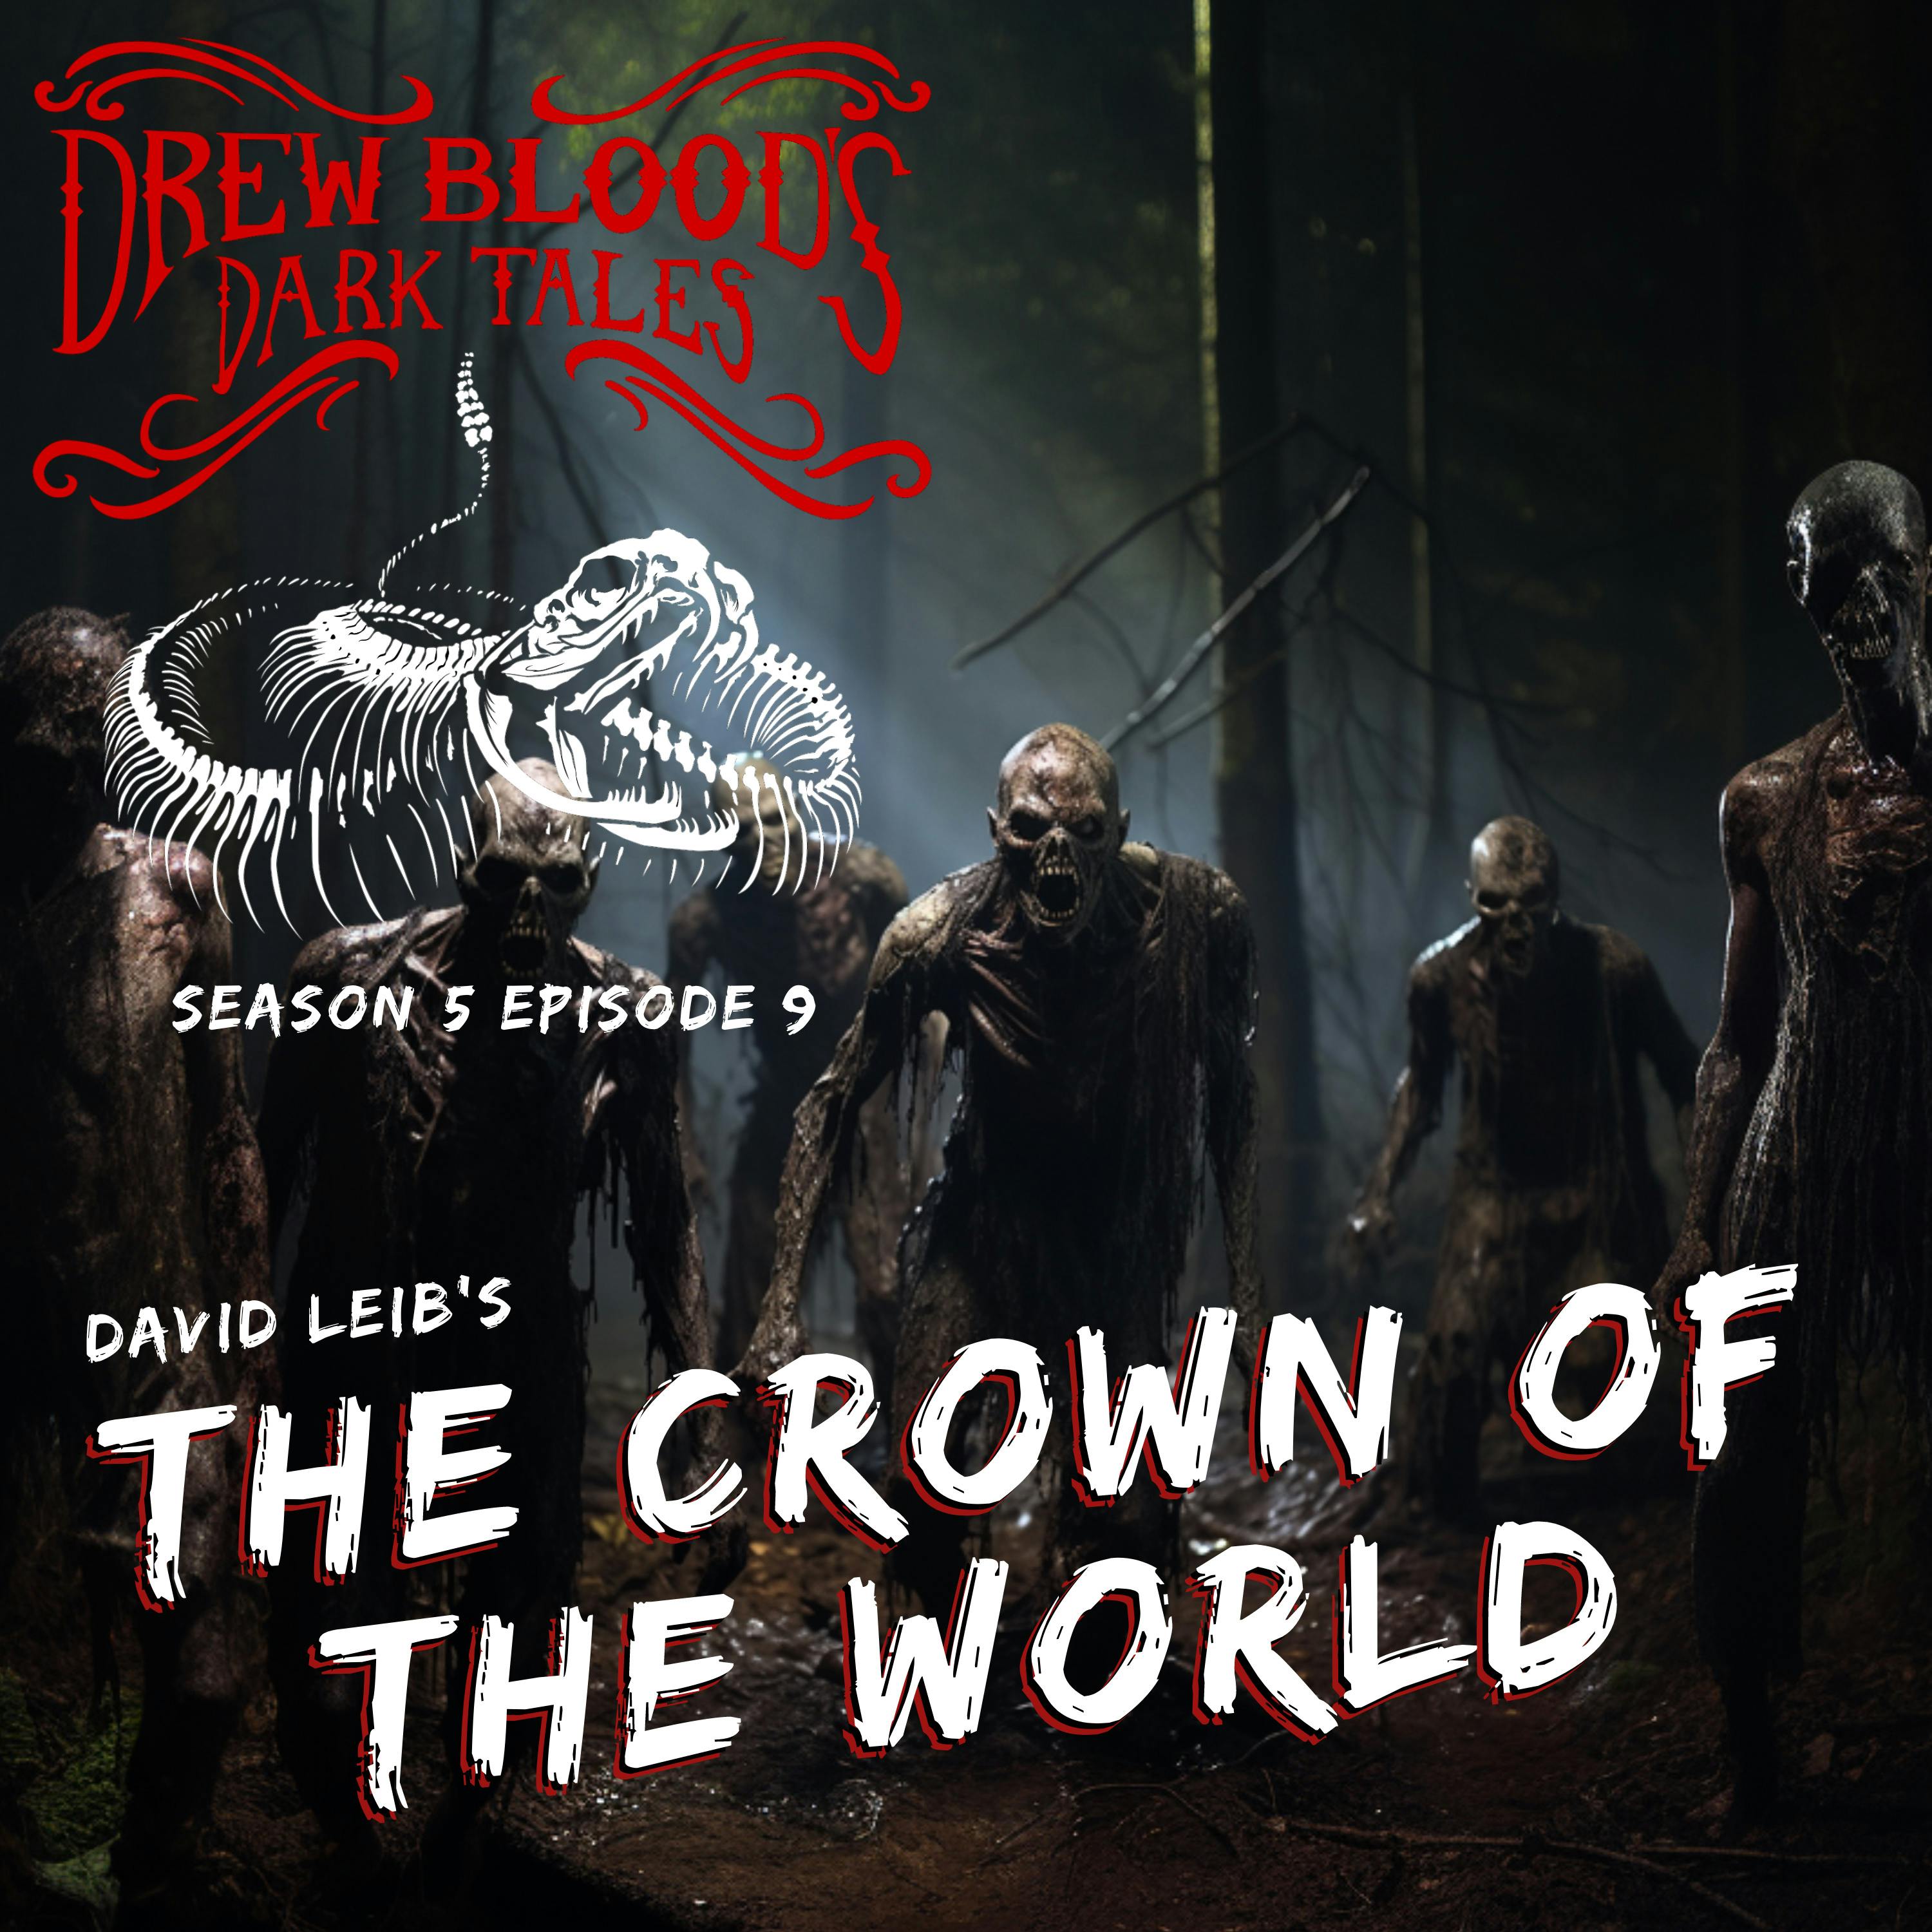 S5E09 - "The Crown of the World" - Drew Blood